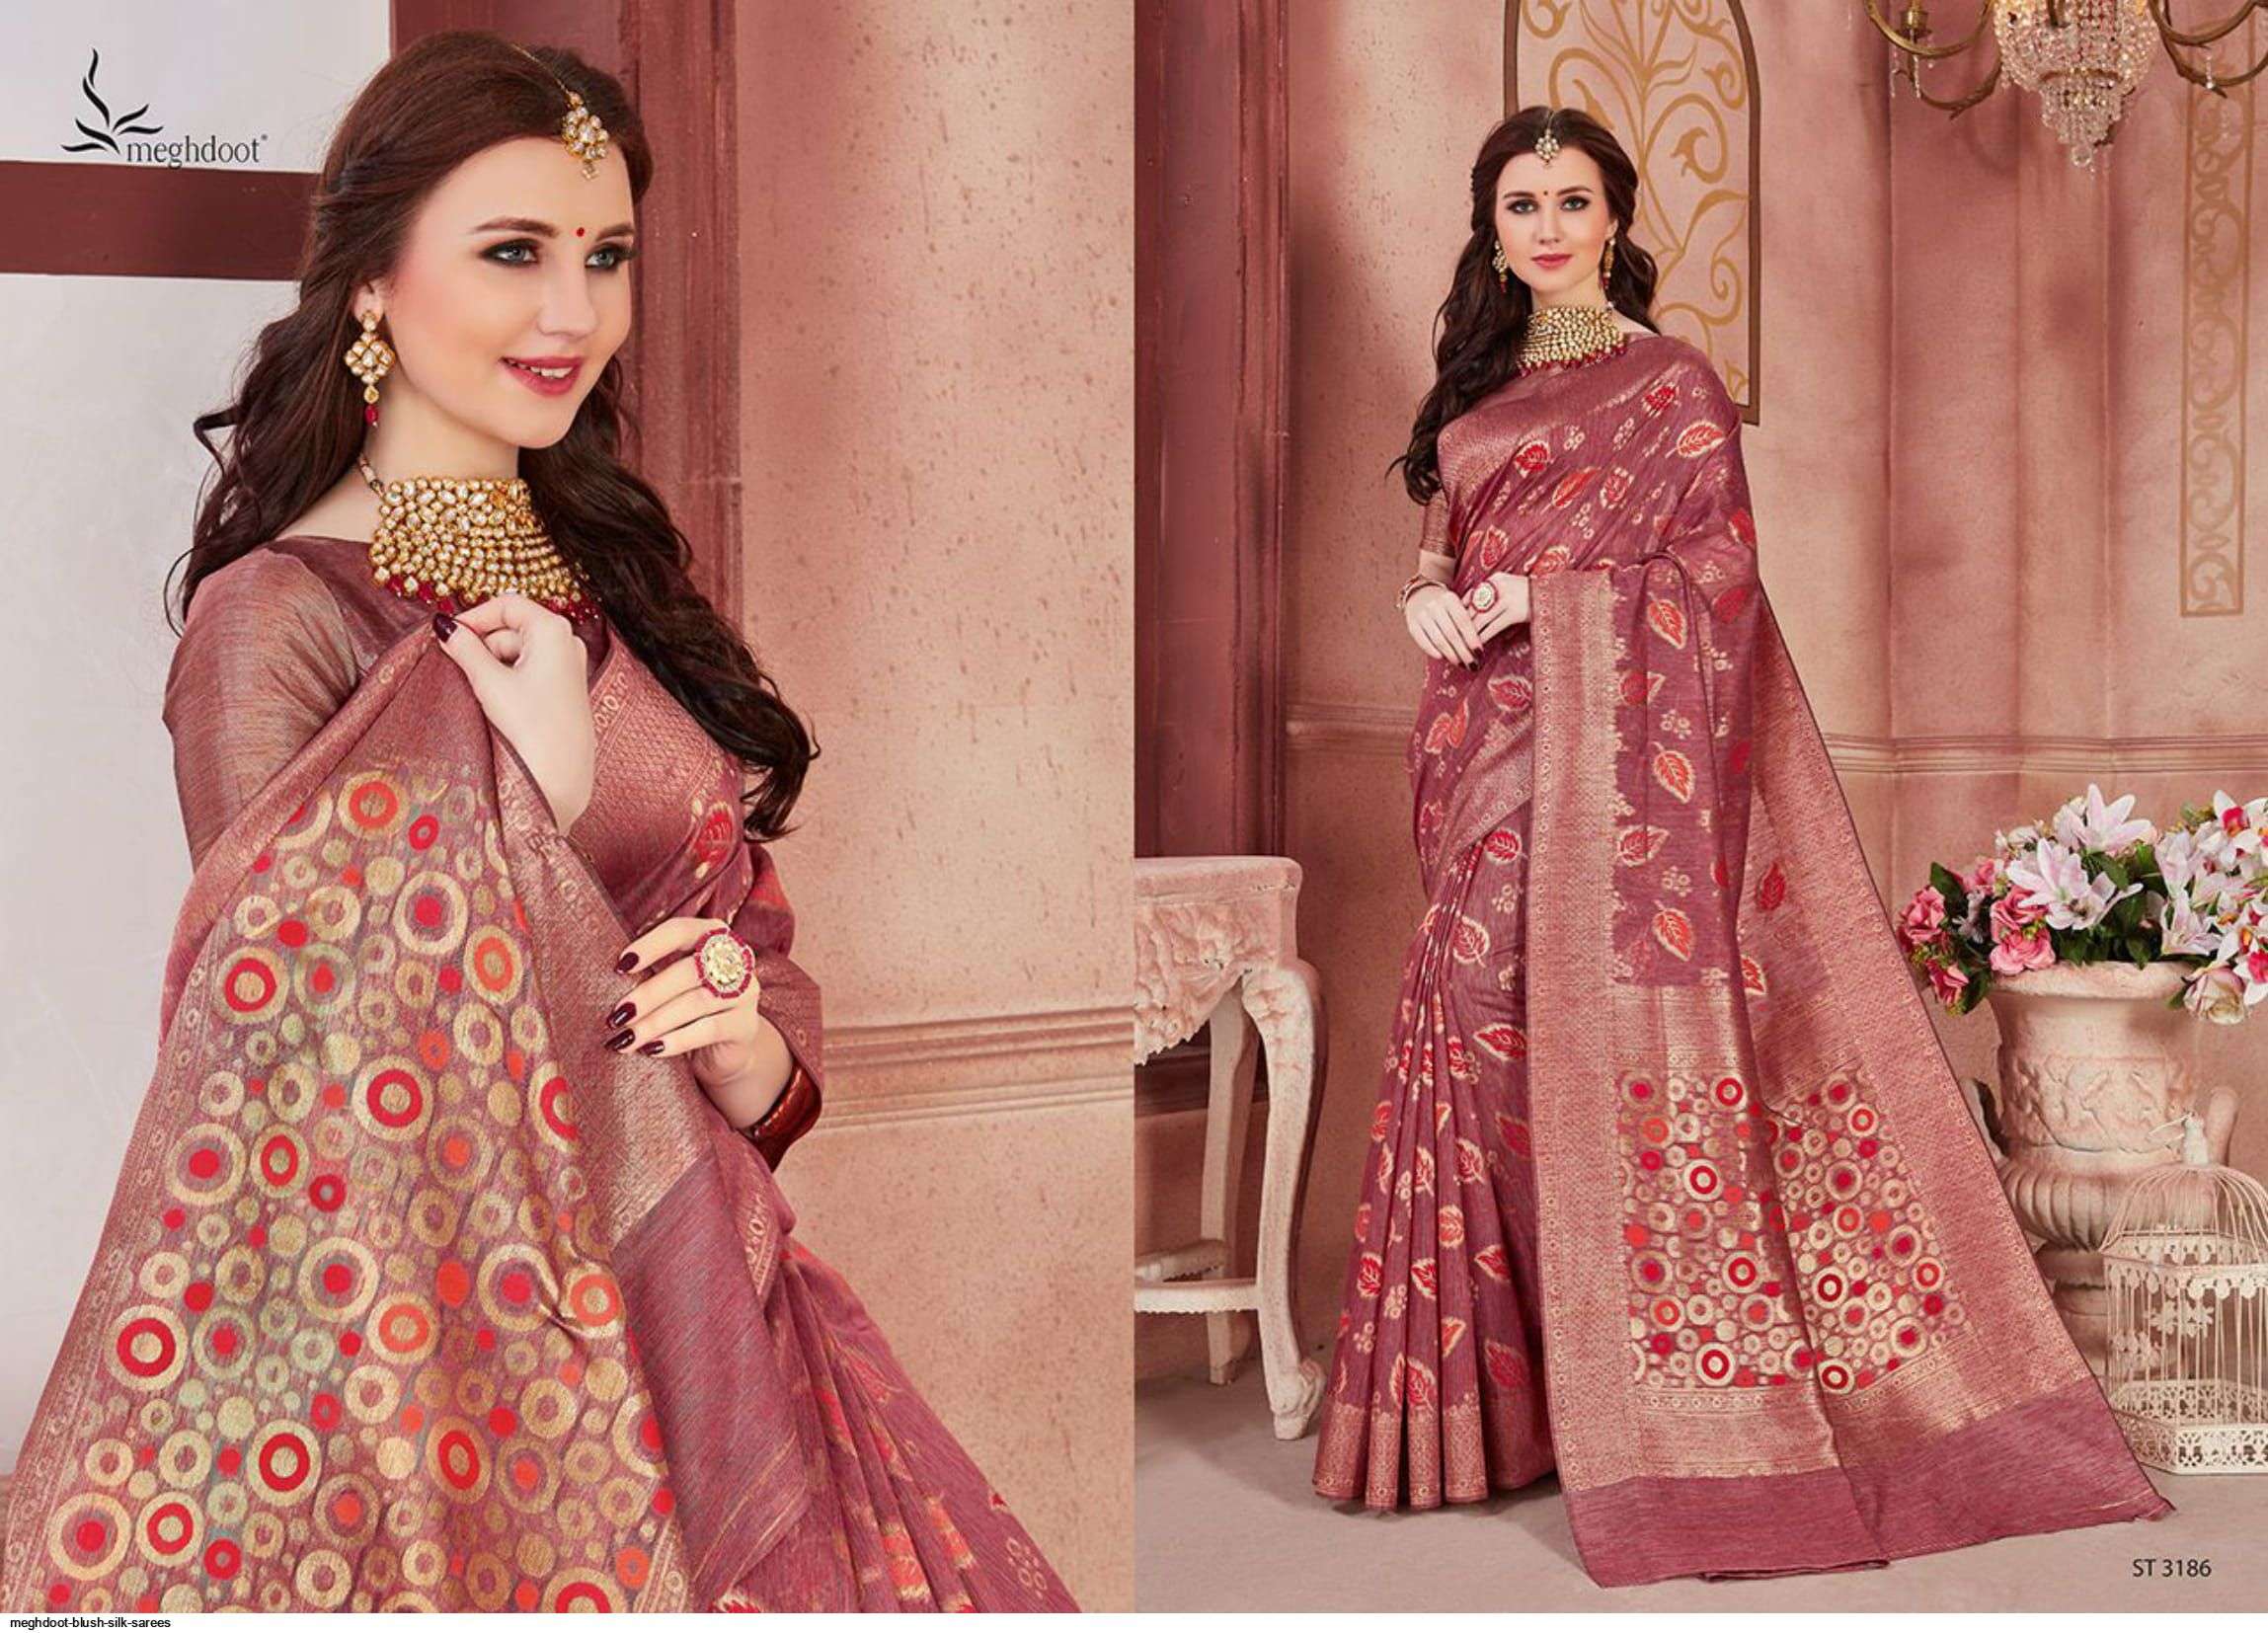 BLUSH BY MOGHDOOT INDIAN TRADITIONAL WEAR COLLECTION BEAUTIFUL STYLISH FANCY COLORFUL PARTY WEAR & OCCASIONAL WEAR JUTE SILK SAREES AT WHOLESALE PRICE